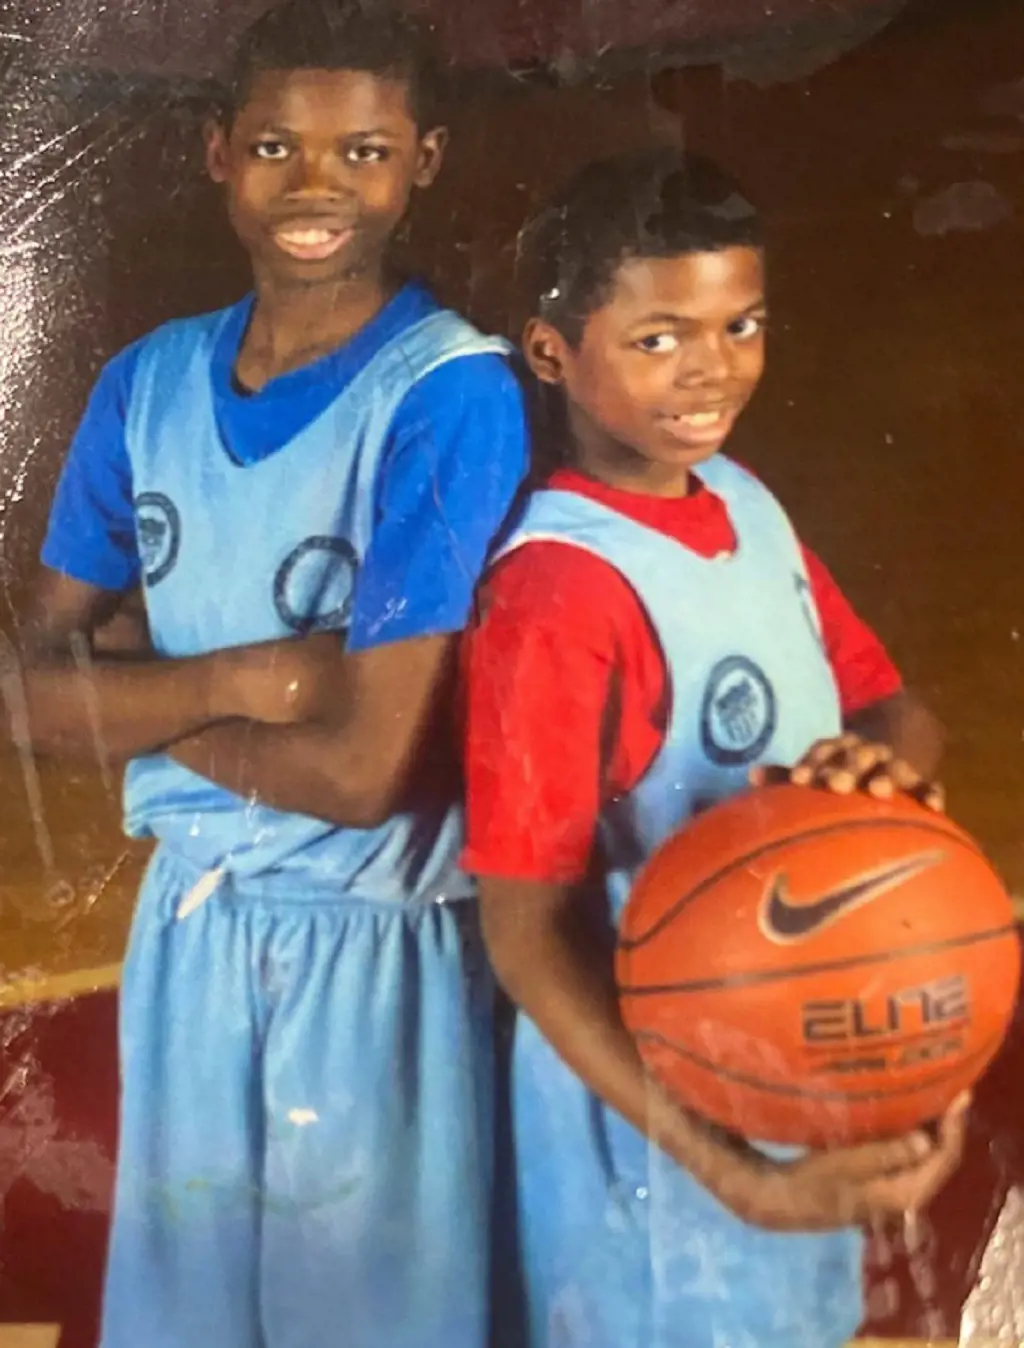  Chris Livingston and Cordell during their childhood